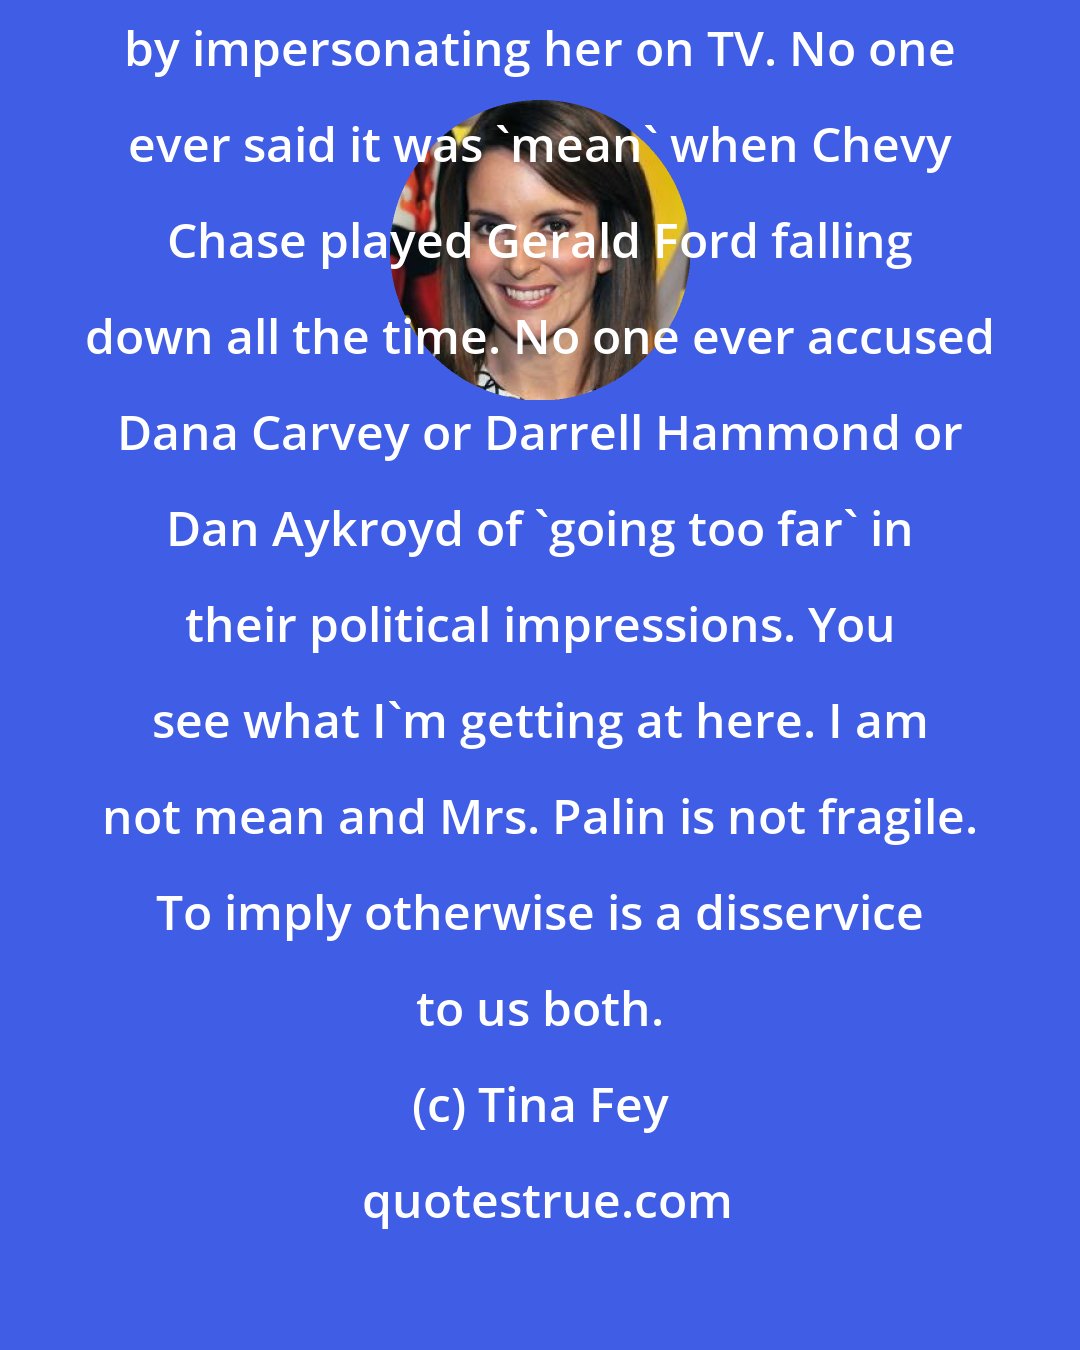 Tina Fey: there was an assumption that I was personally attacking Sarah Palin by impersonating her on TV. No one ever said it was 'mean' when Chevy Chase played Gerald Ford falling down all the time. No one ever accused Dana Carvey or Darrell Hammond or Dan Aykroyd of 'going too far' in their political impressions. You see what I'm getting at here. I am not mean and Mrs. Palin is not fragile. To imply otherwise is a disservice to us both.